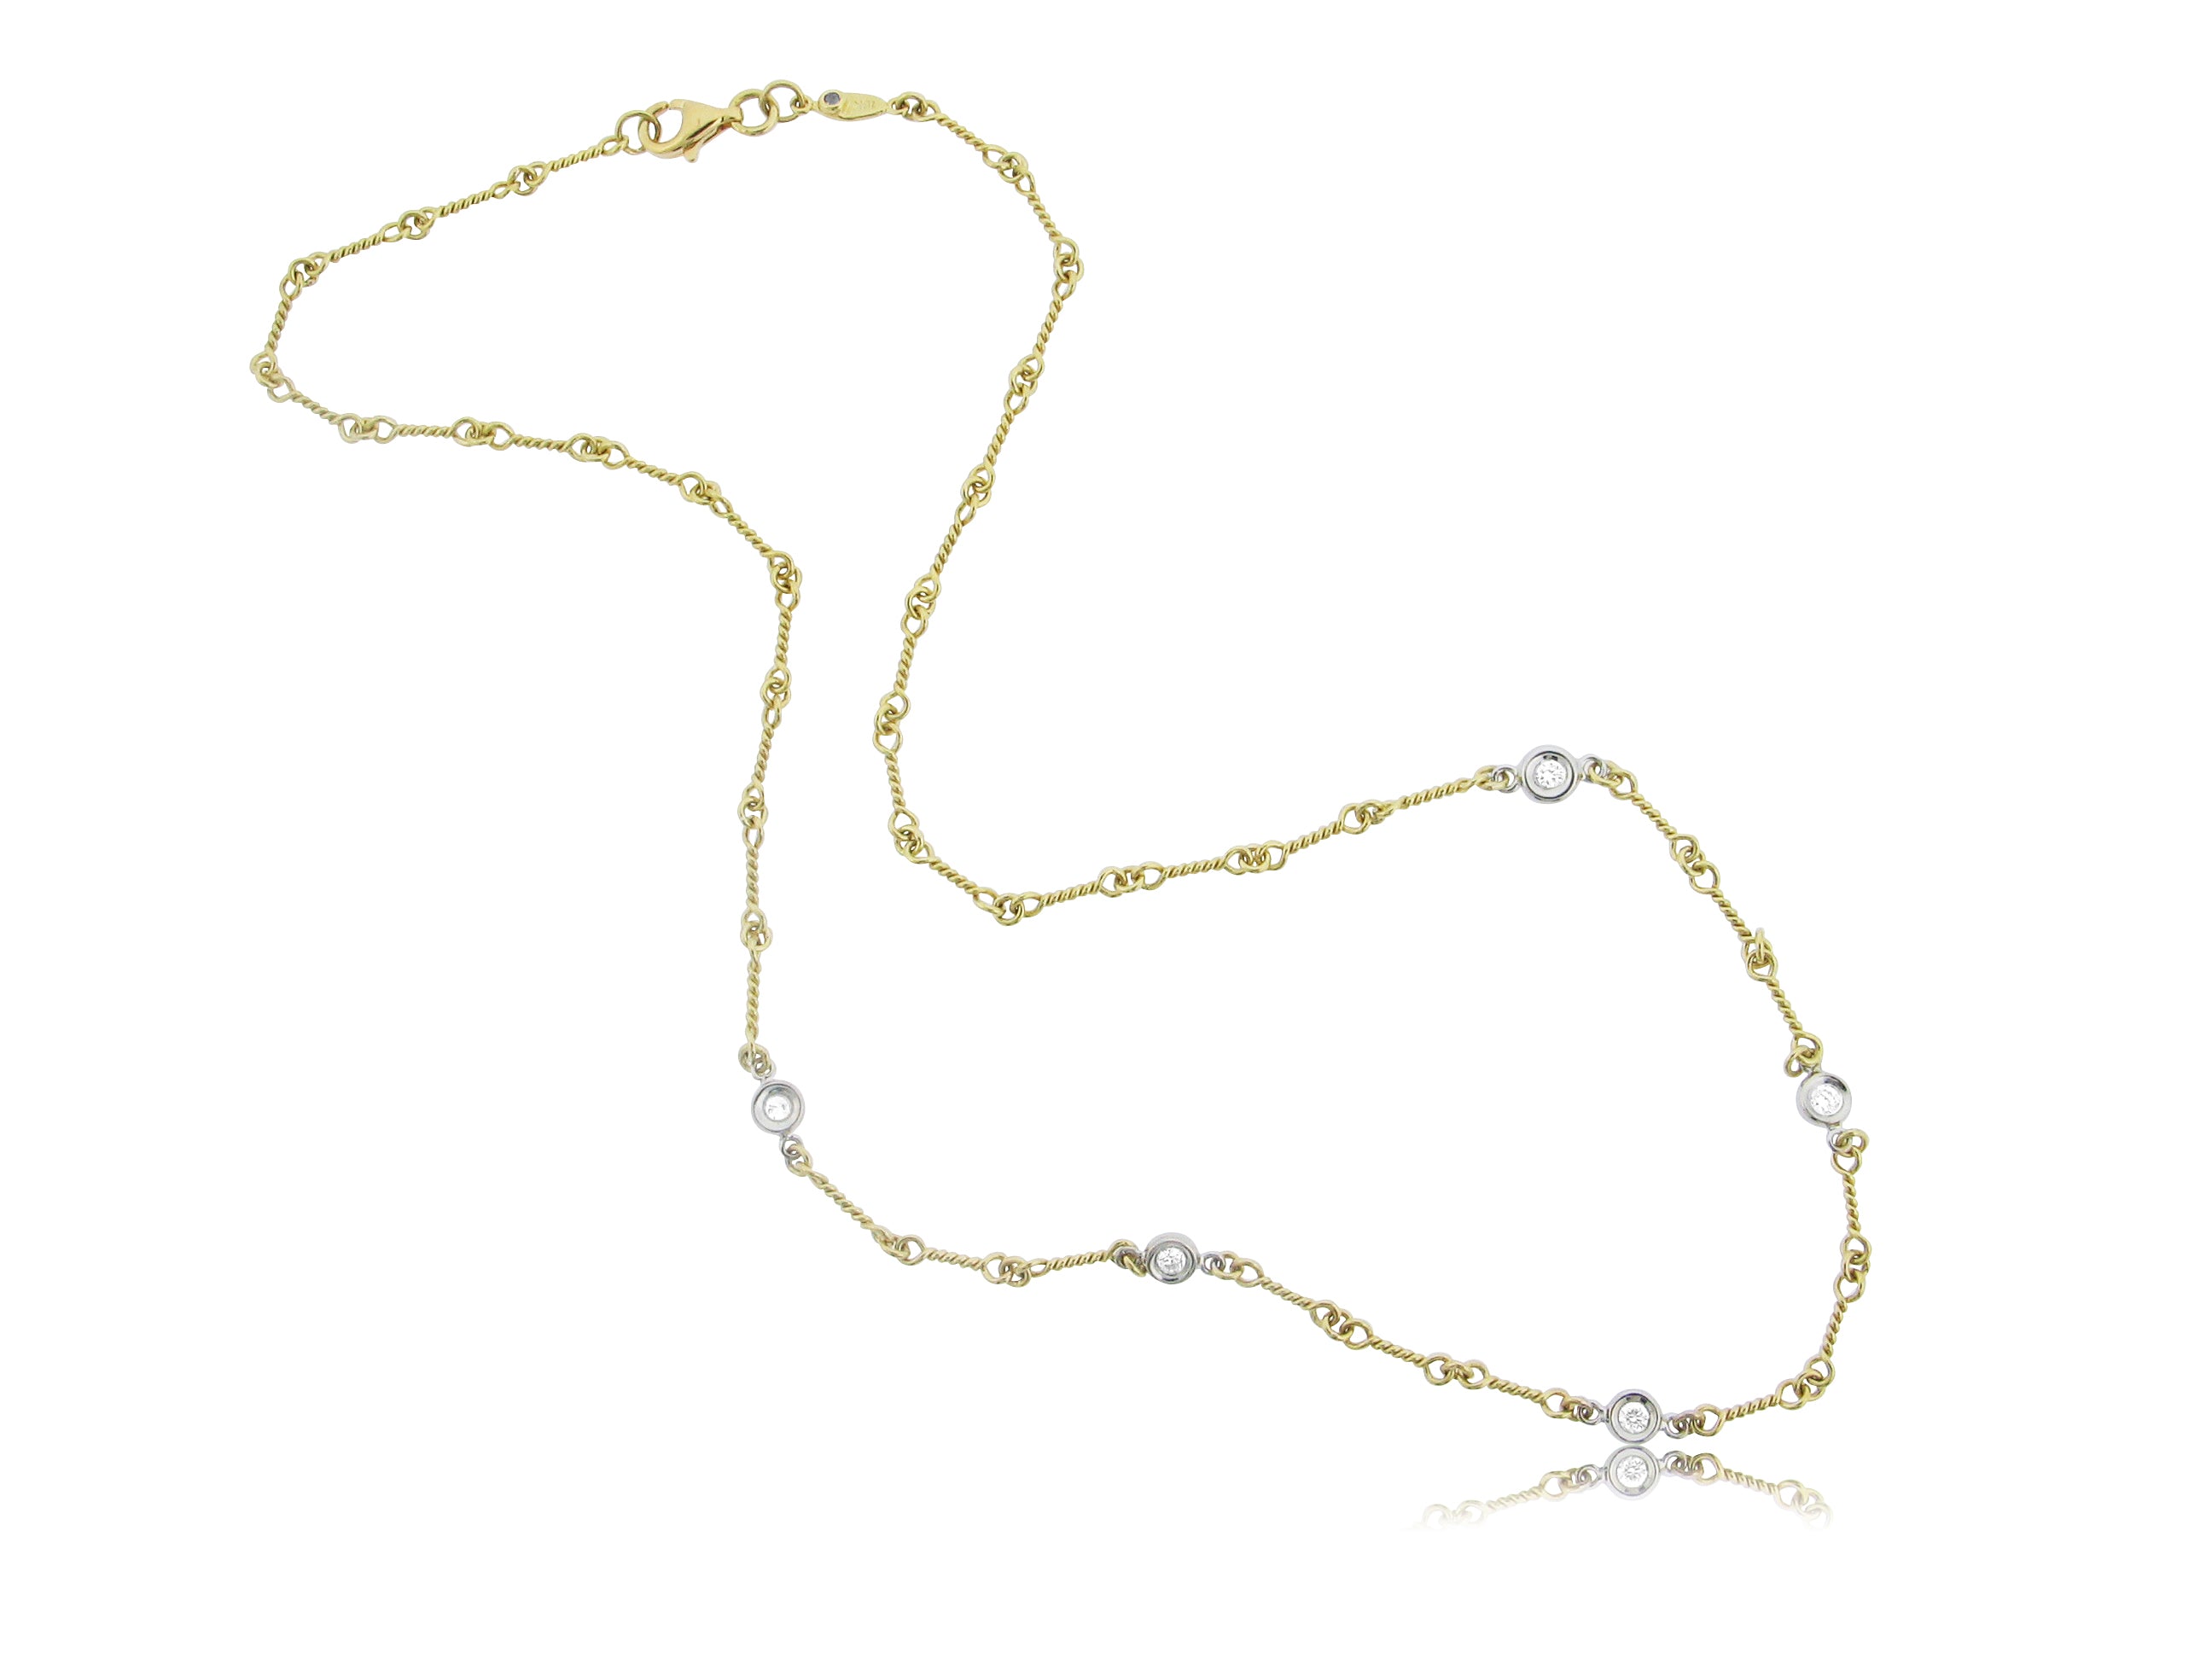 ROBERTO COIN 18K YELLOW AND WHITE GOLD 0.20CT SI/G DIAMOND STATION NECKLACE ON A DOG BONE CHAIN FROM THE DIAMONDS FROM THE INCH COLLECTION